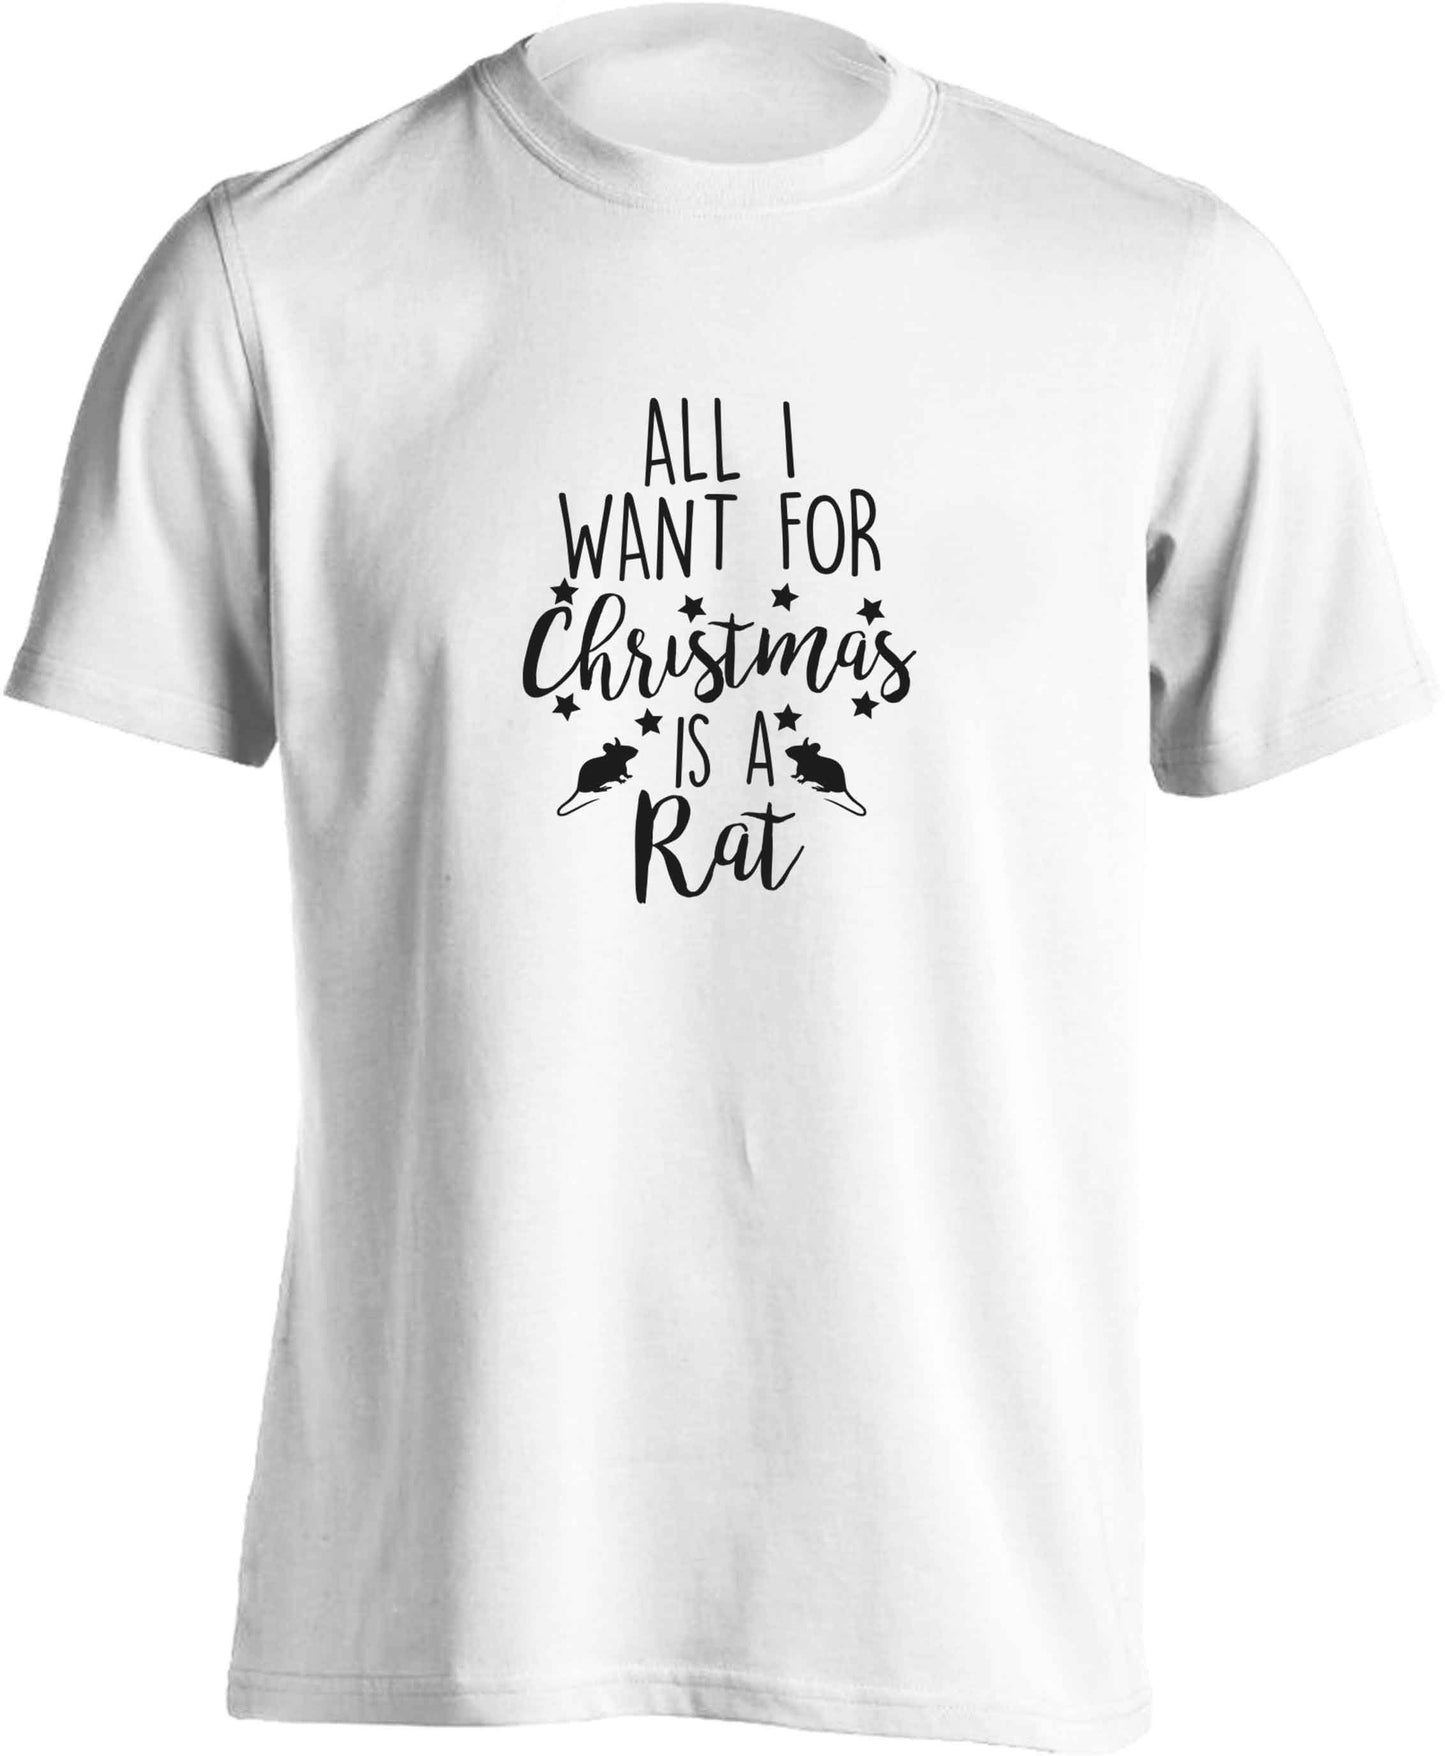 All I want for Christmas is a rat adults unisex white Tshirt 2XL